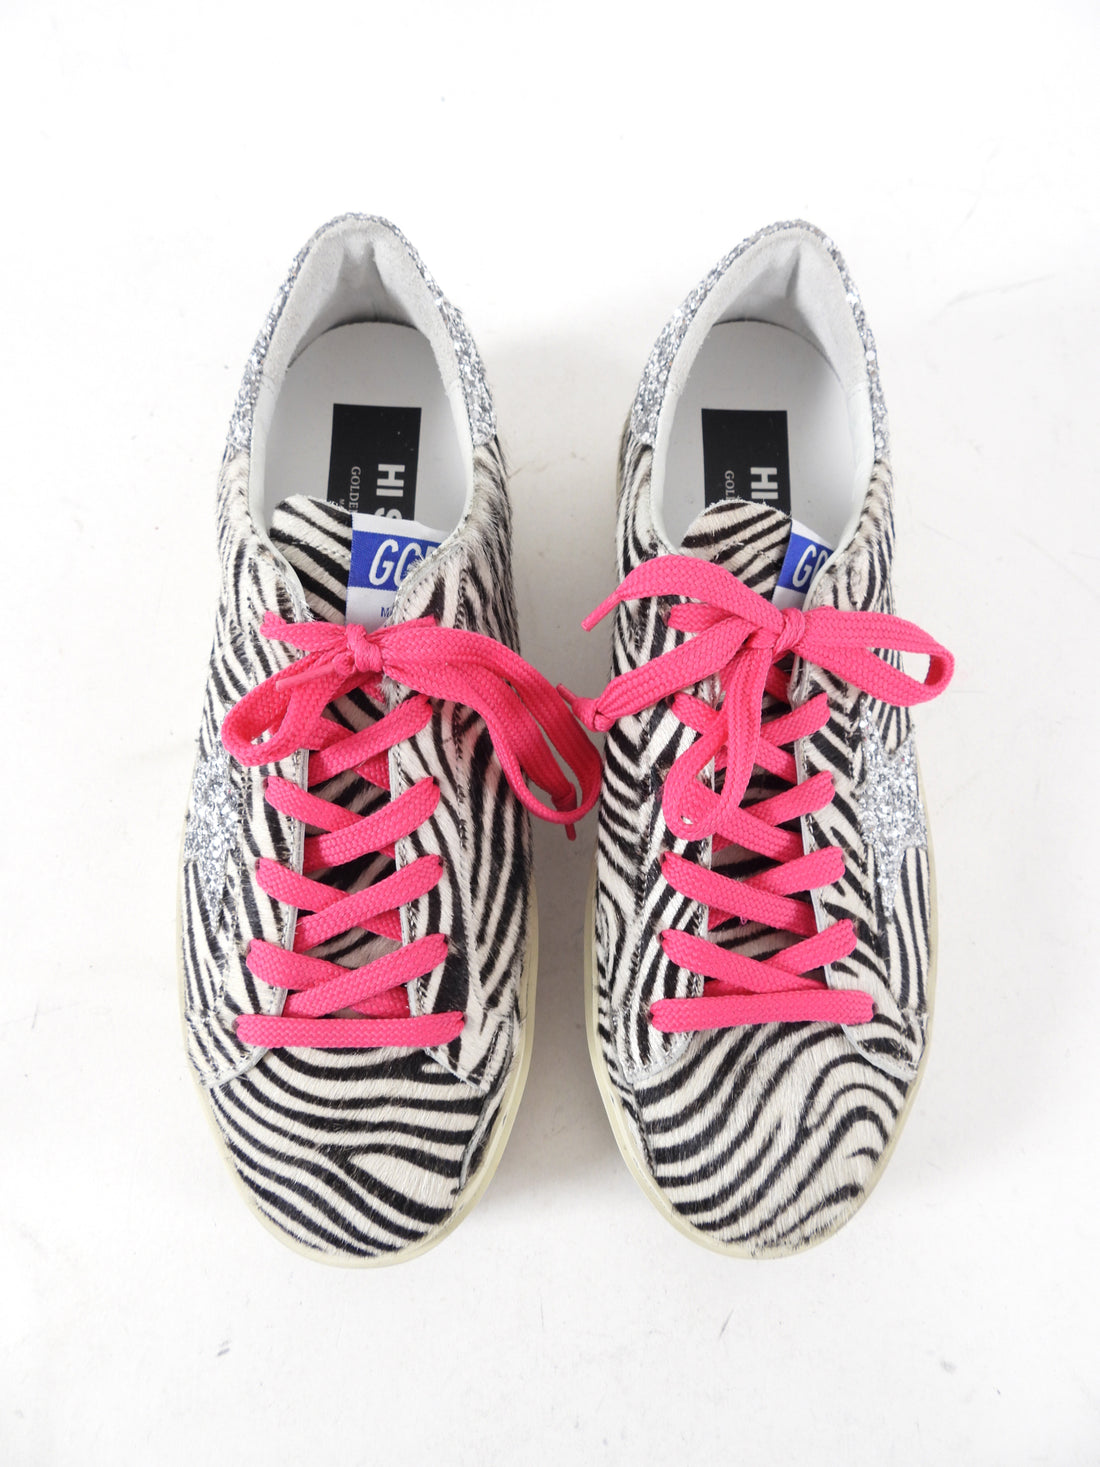 Golden Goose Zebra Calf Hair Sneakers with Pink Laces - 40